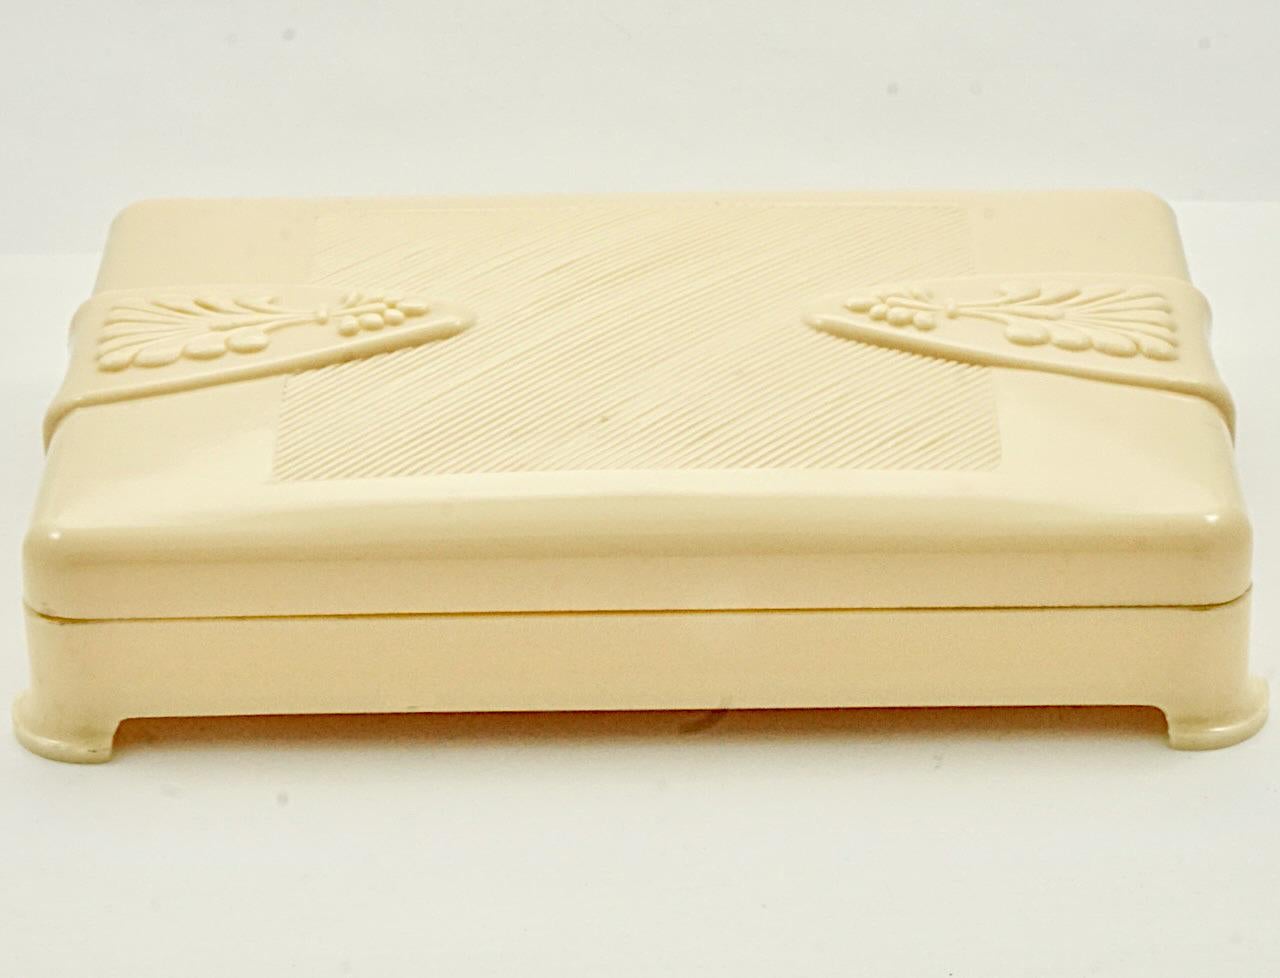 Beautiful Art Deco cream celluloid box. Measuring length 14.3 cm / 5.6 inches by width 9.6 cm / 3.77 inches, and depth 2.7 cm / 1 inch. The lid has a lovely embossed design. The box is in very good condition. There is a one crack to the back.

This